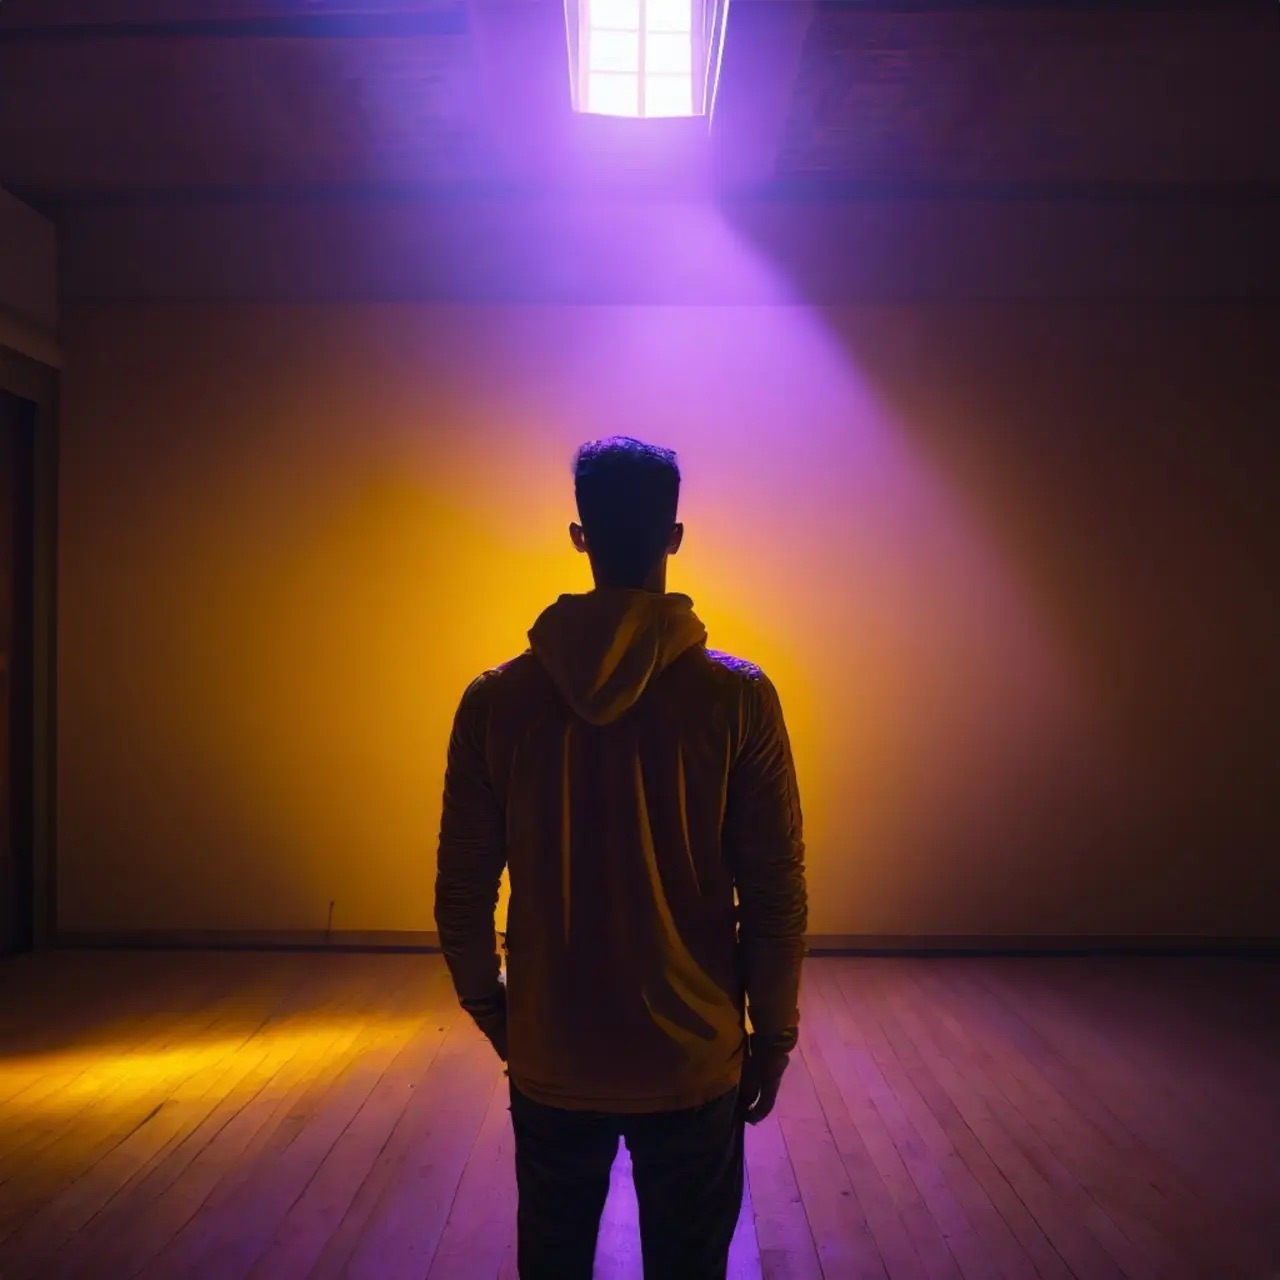 A photo of a person standing in an immersive room with purple and yellow lights